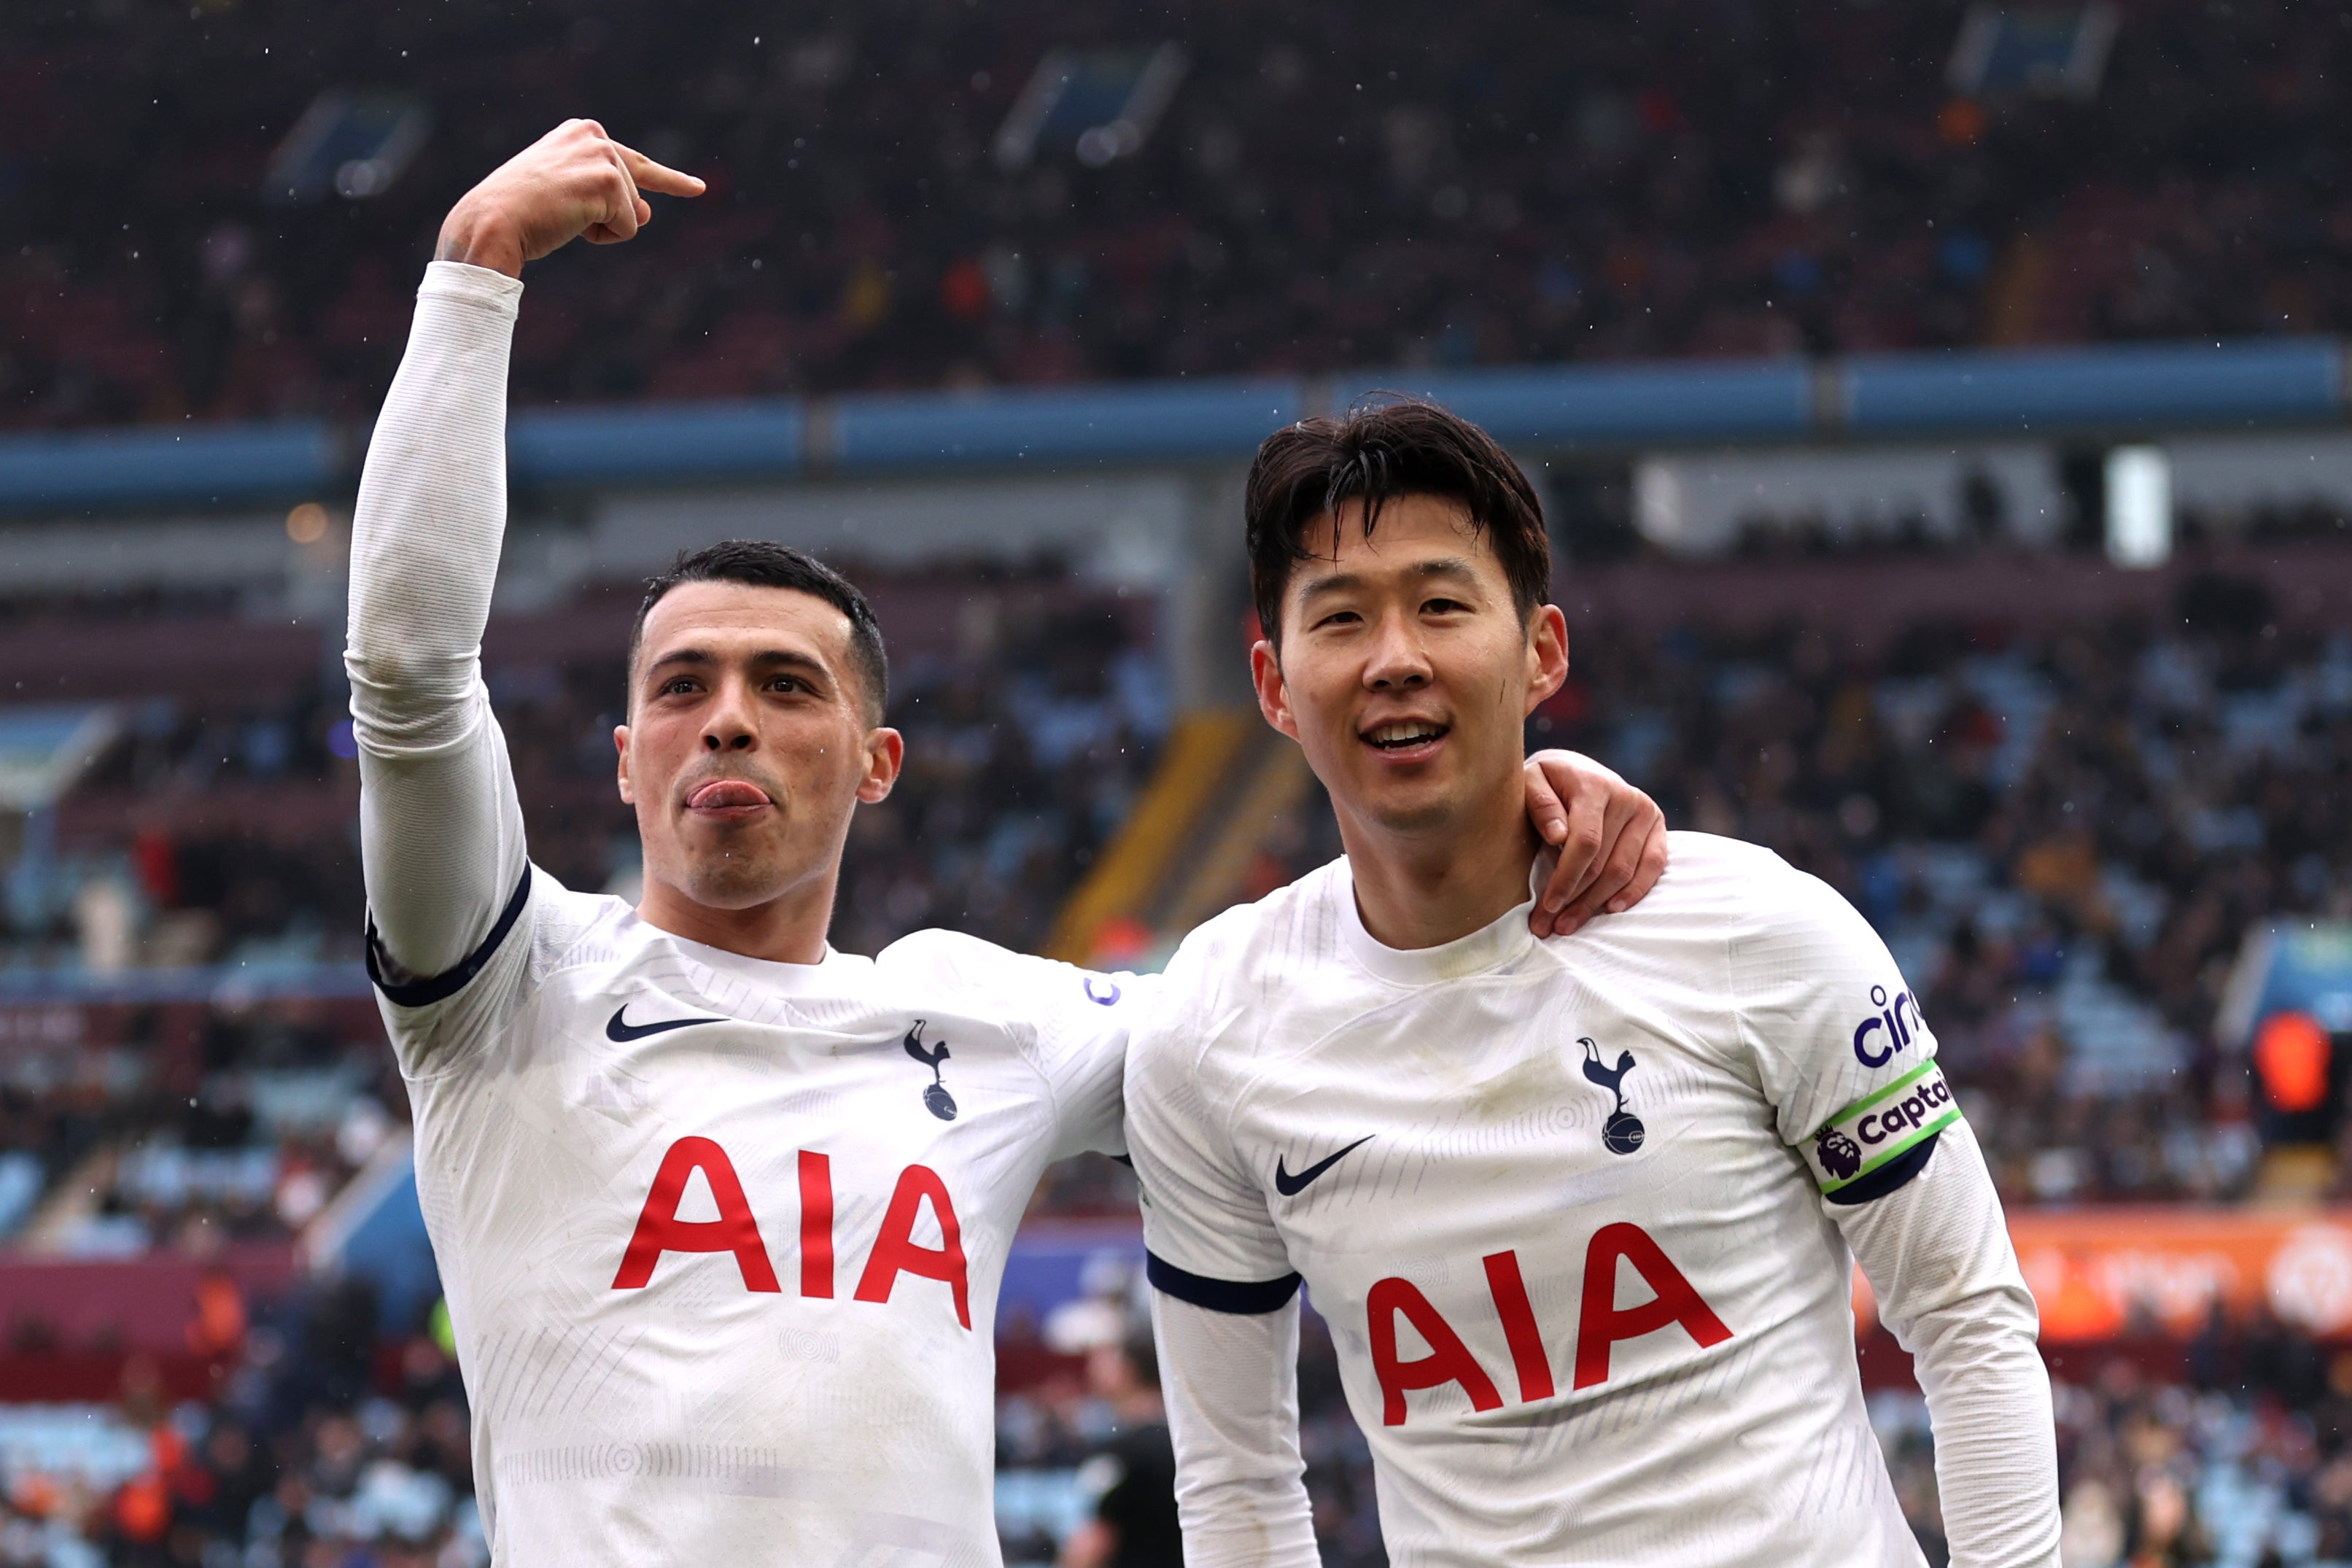 Son Heung-min struck in the 91st minute after Villa’s second-half collapse